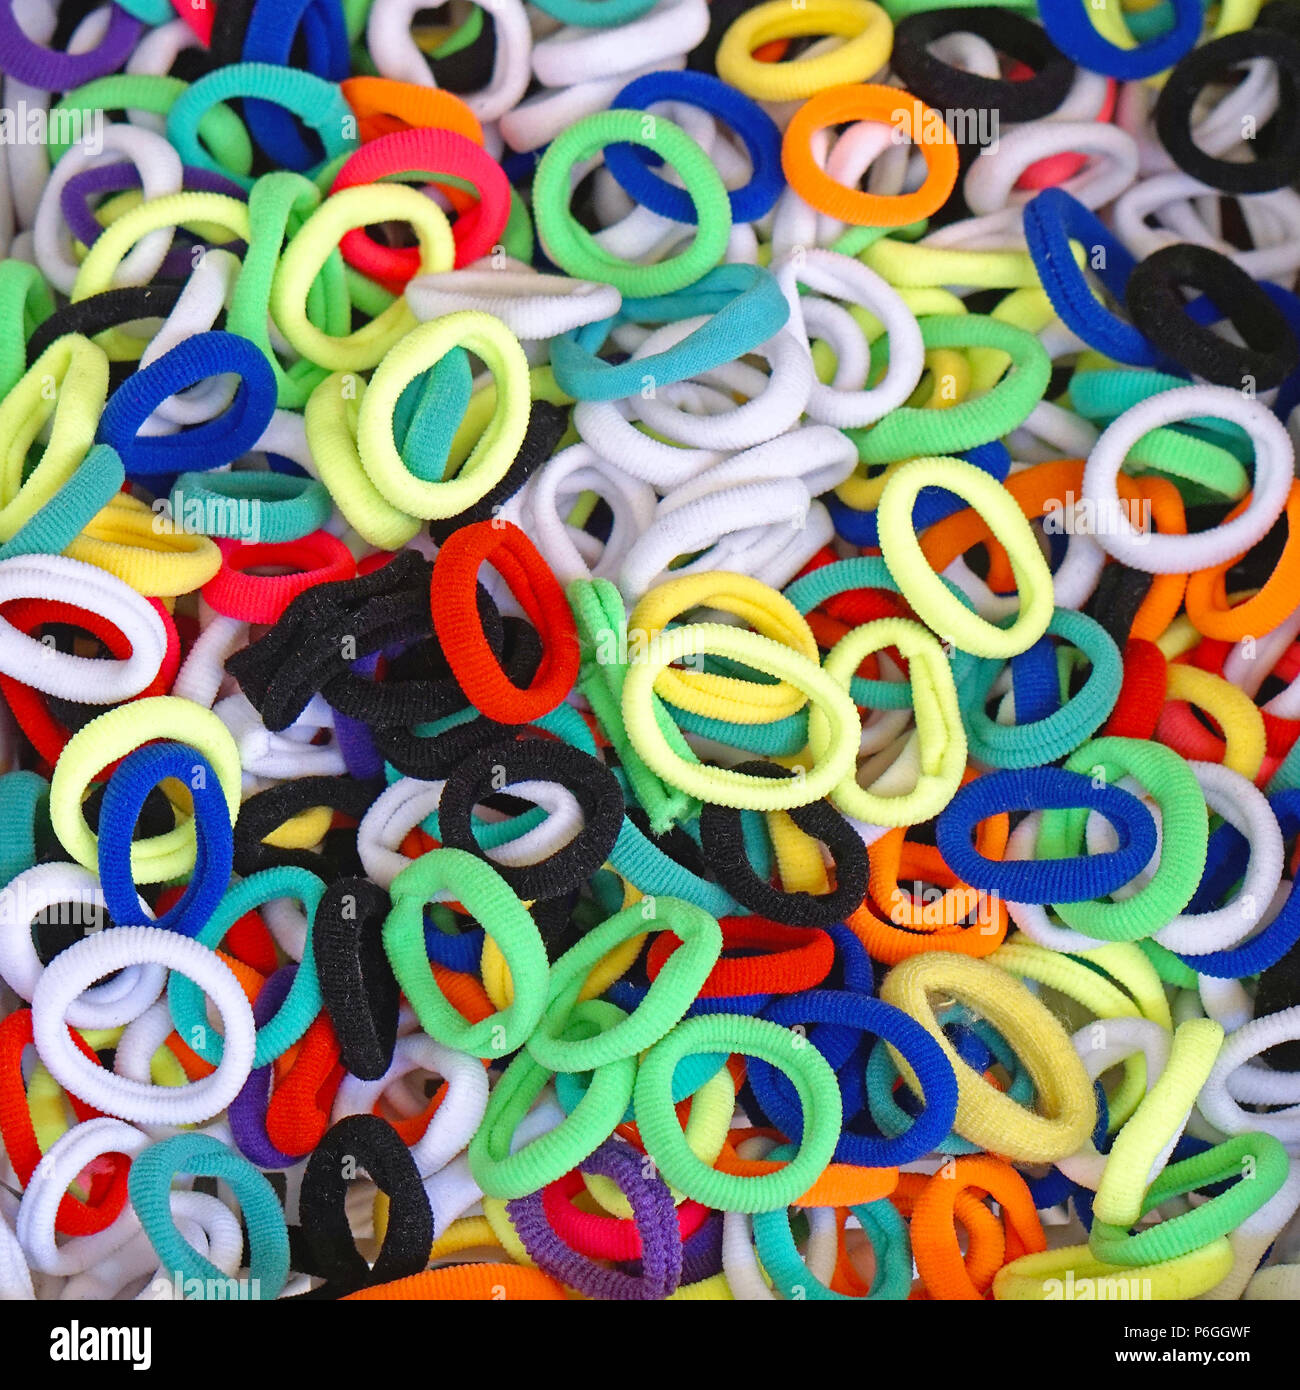 Bunch of hair bands in different colors Stock Photo